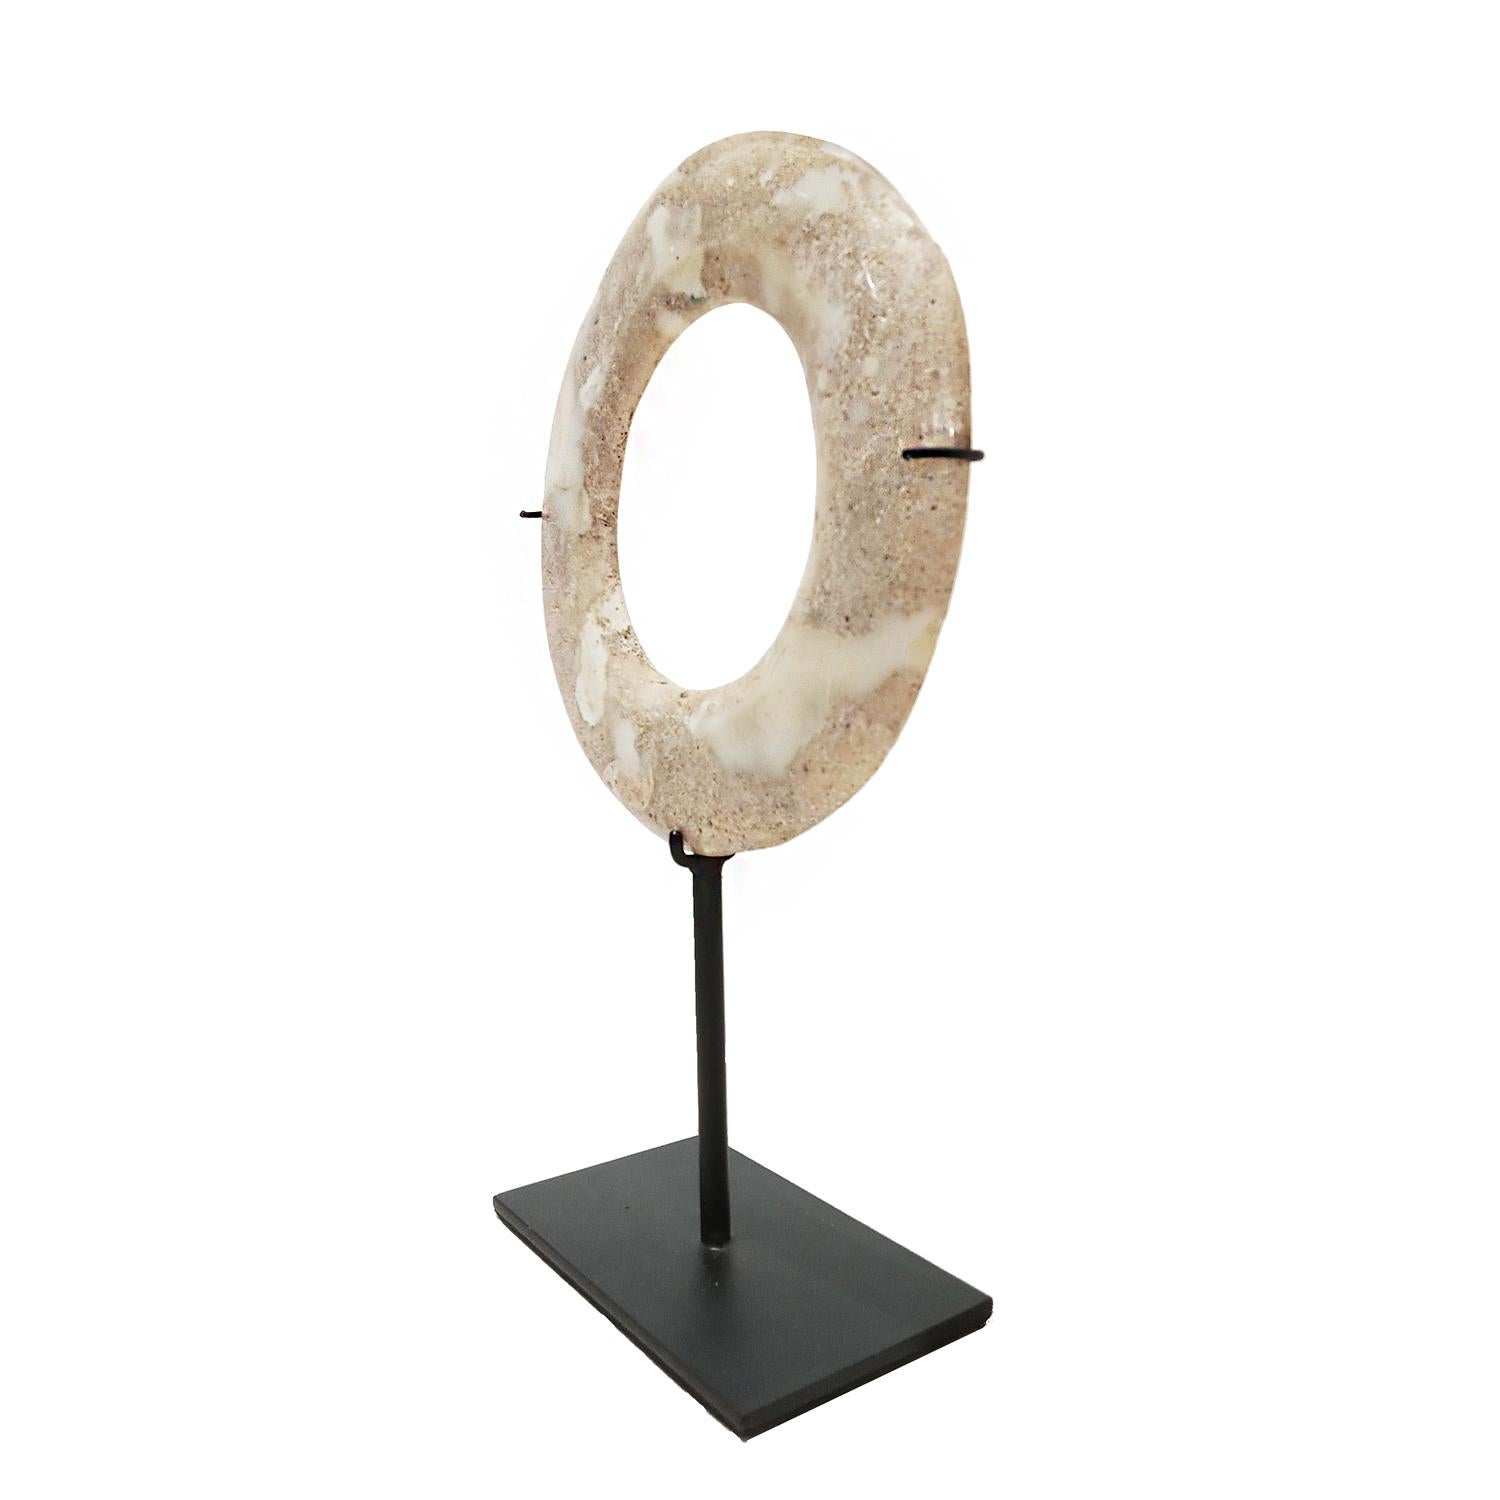 A beautiful stone disk, hand-carved in Indonesia. Mounted on a black metal stand. White stone, polished and shaped to resemble marble.

7.5 inches diameter, 2.75 inches deep (stand base), 11.5 inches total height (mounted). 

Other stone disks are